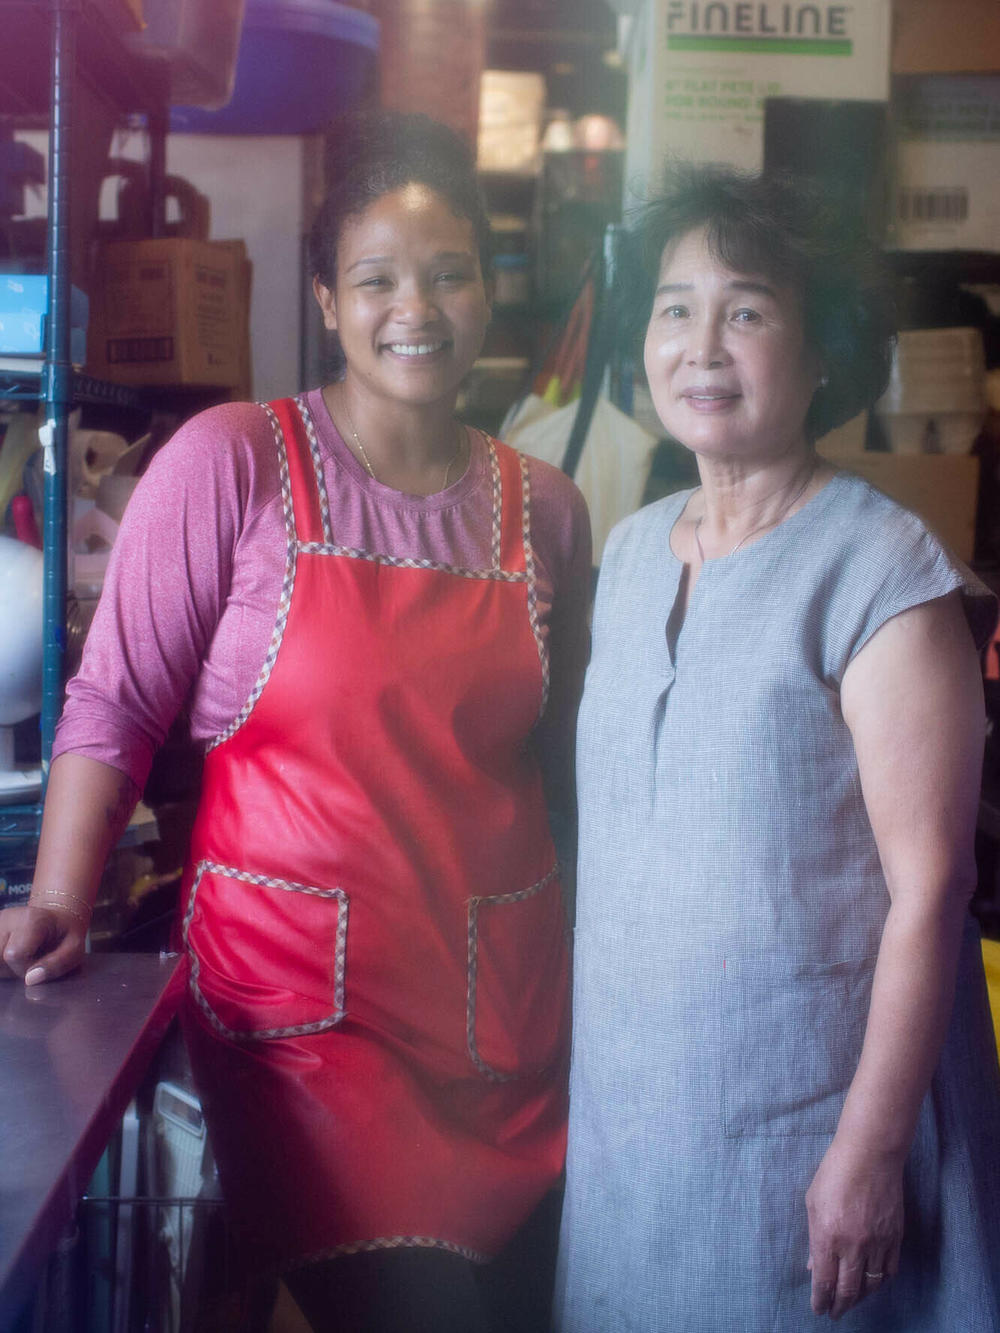 Patrice Cunningham (left) started Tae-gu Kimchi in 2020, basing her recipe from her mother Hong Cunningham. Her mom still helps out and weighs in as the kimchi gets made.